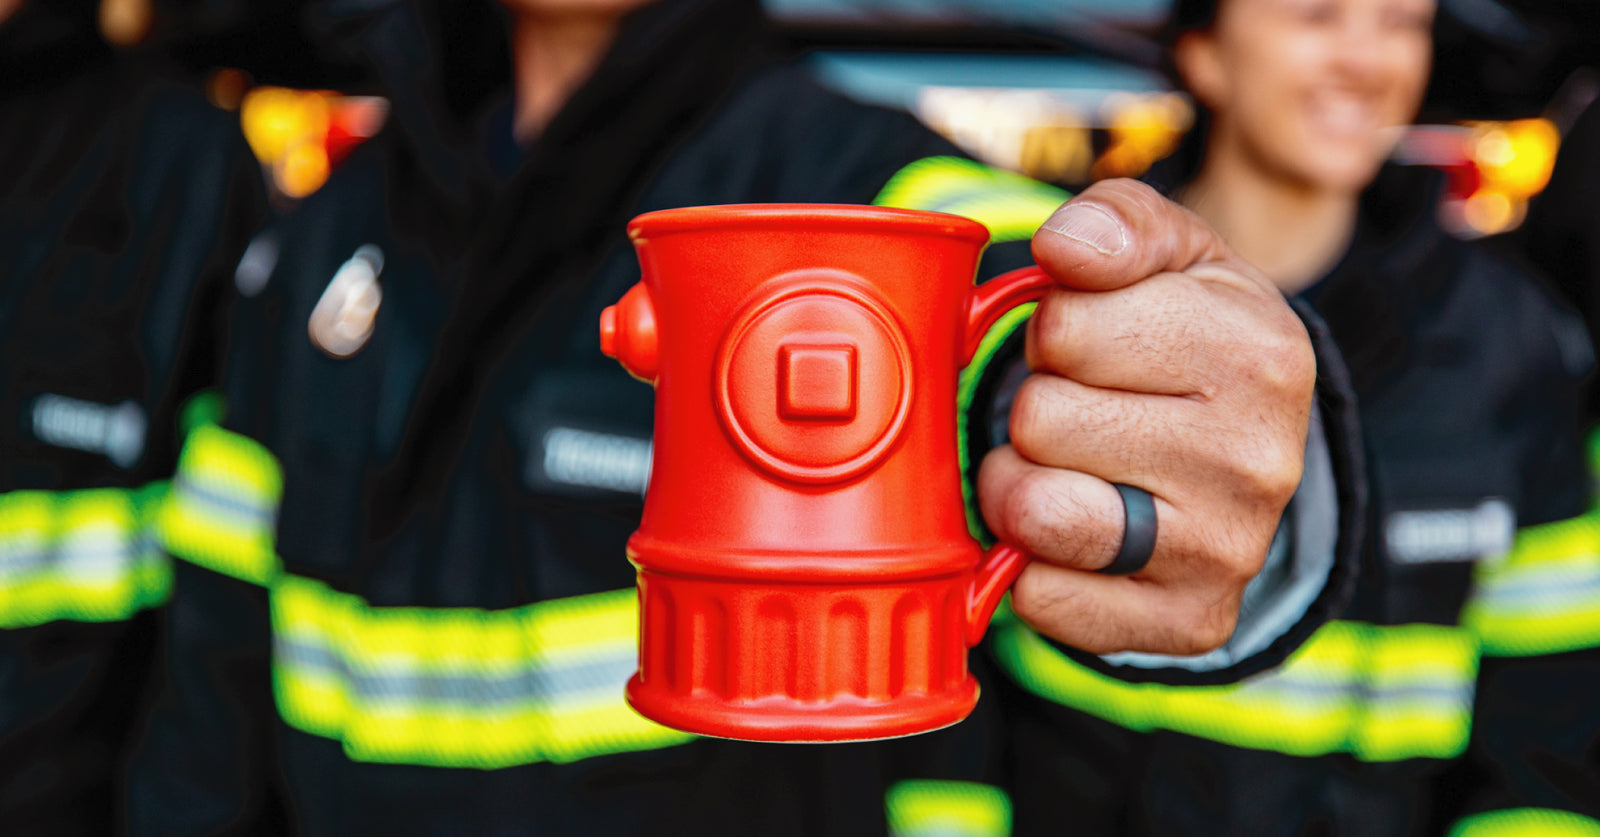 Fire hydrant mug in red held by a firefighter in uniform.